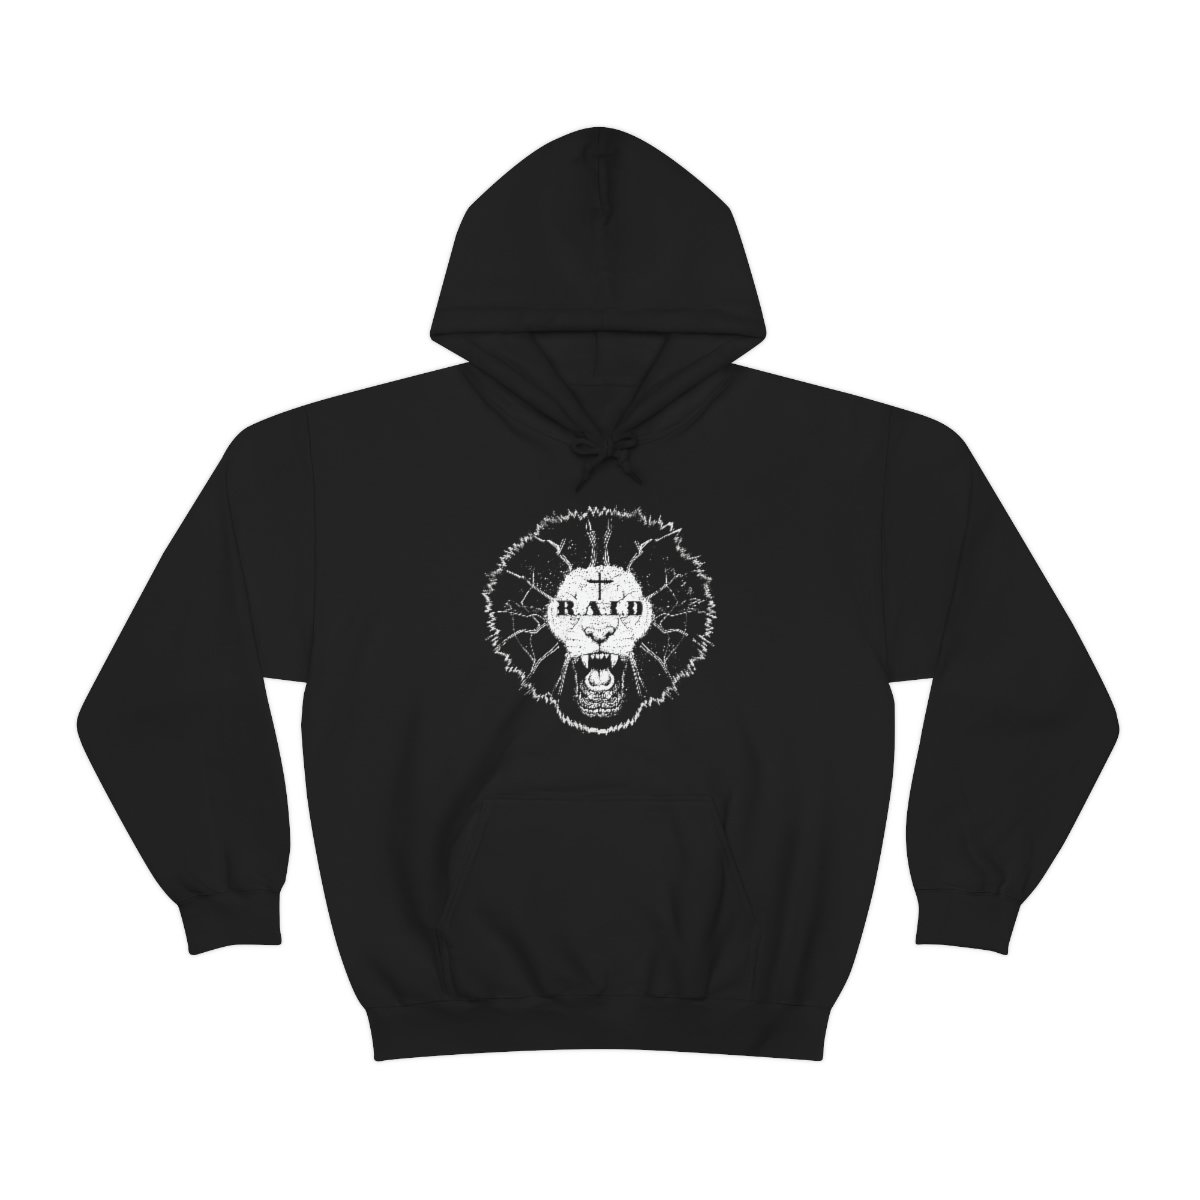 R.A.I.D Lion Pullover Hooded Sweatshirt